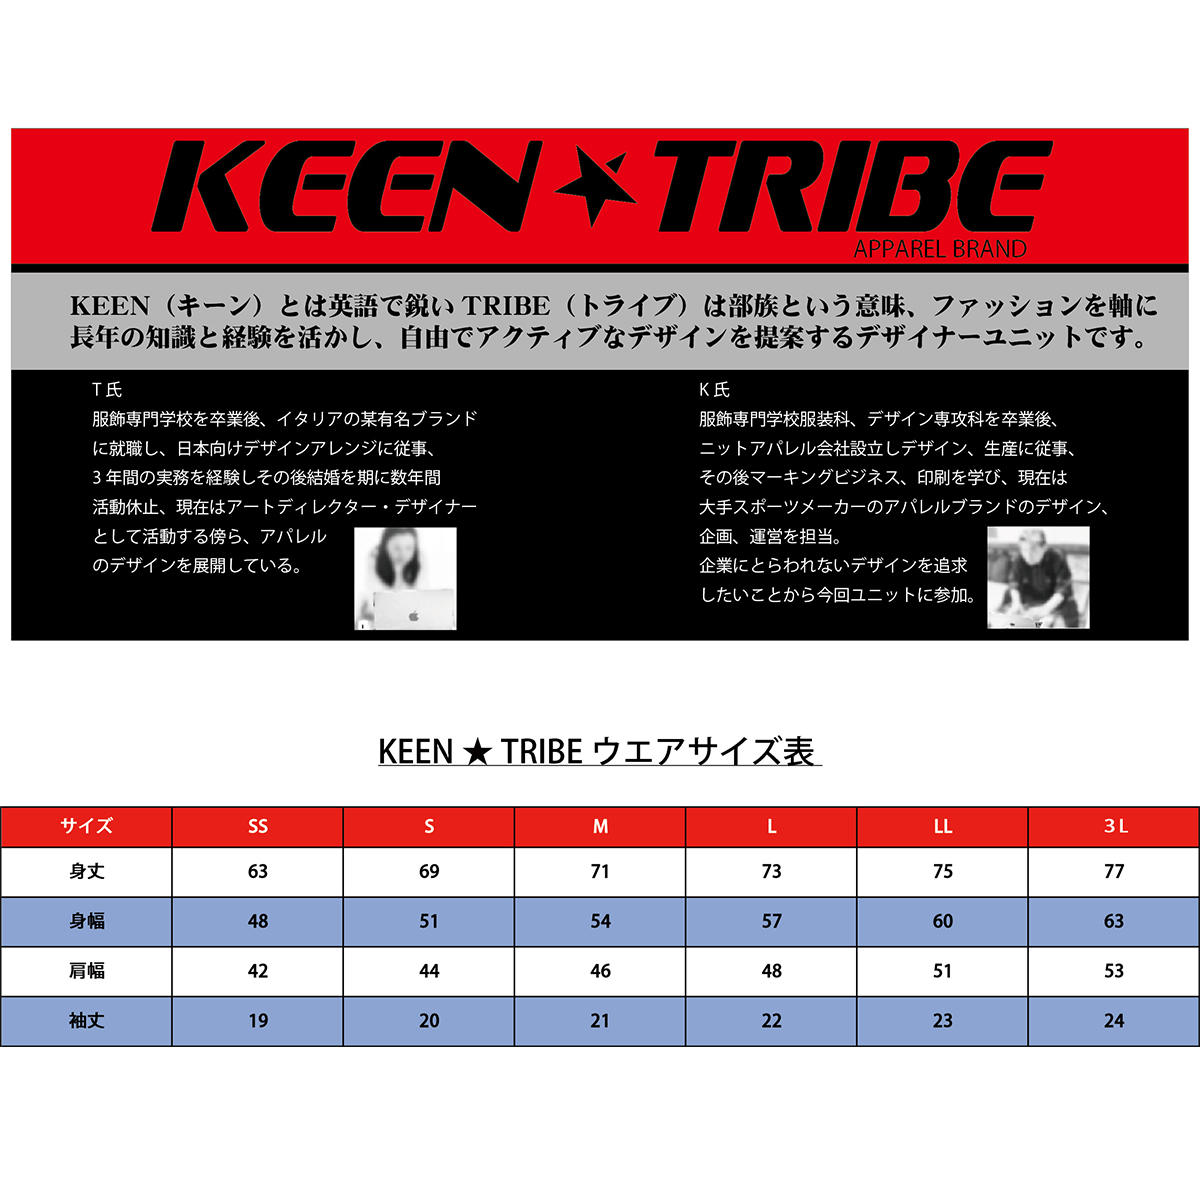 KEEN ★ TRIBE　KT-17(受注生産)